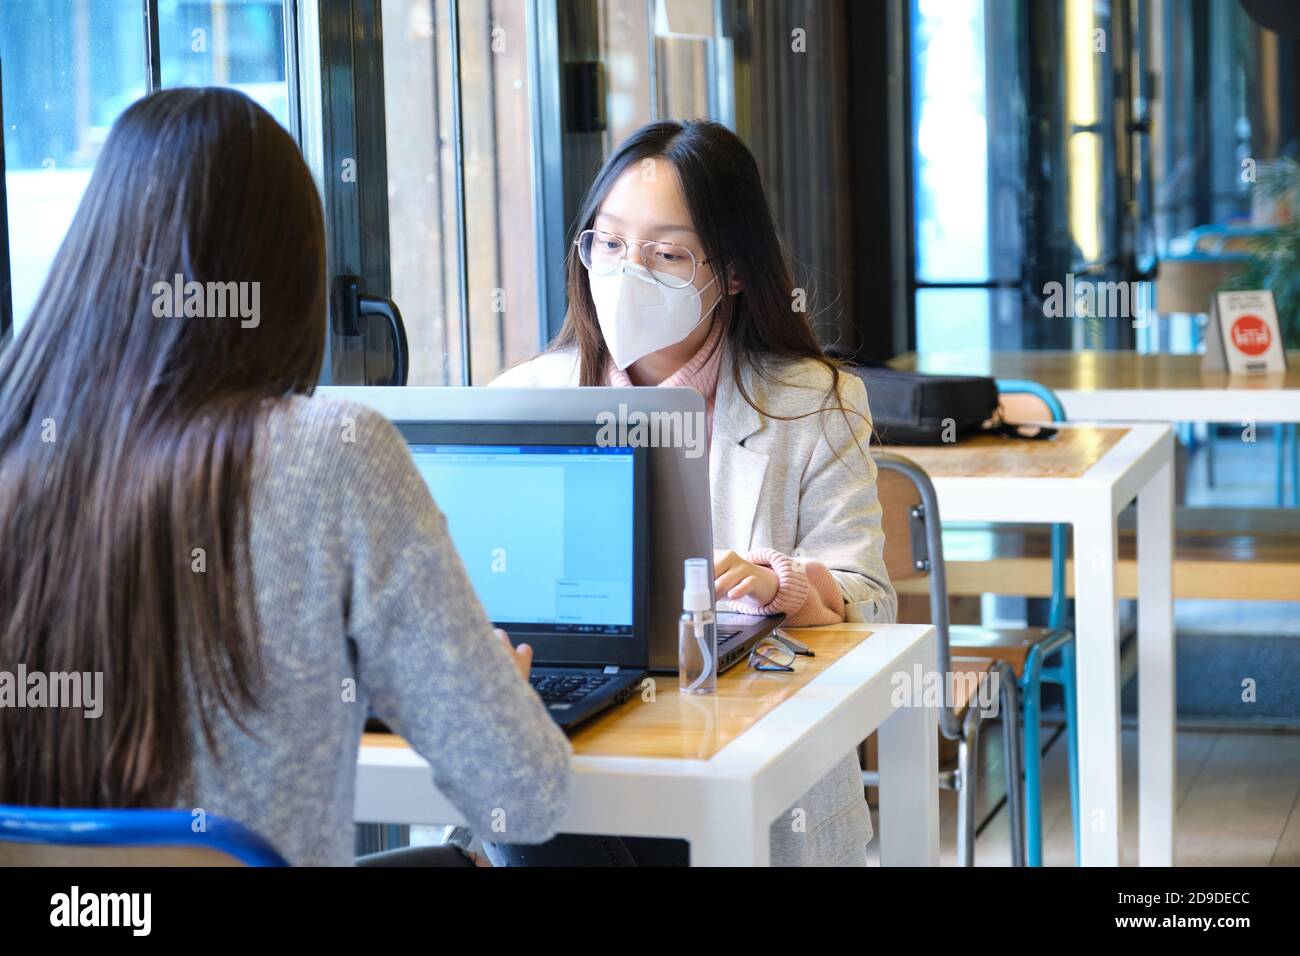 Two female students wearing face masks working on their computers in a restaurant. New normal in restaurants. Coronavirus pandemic. Stock Photo